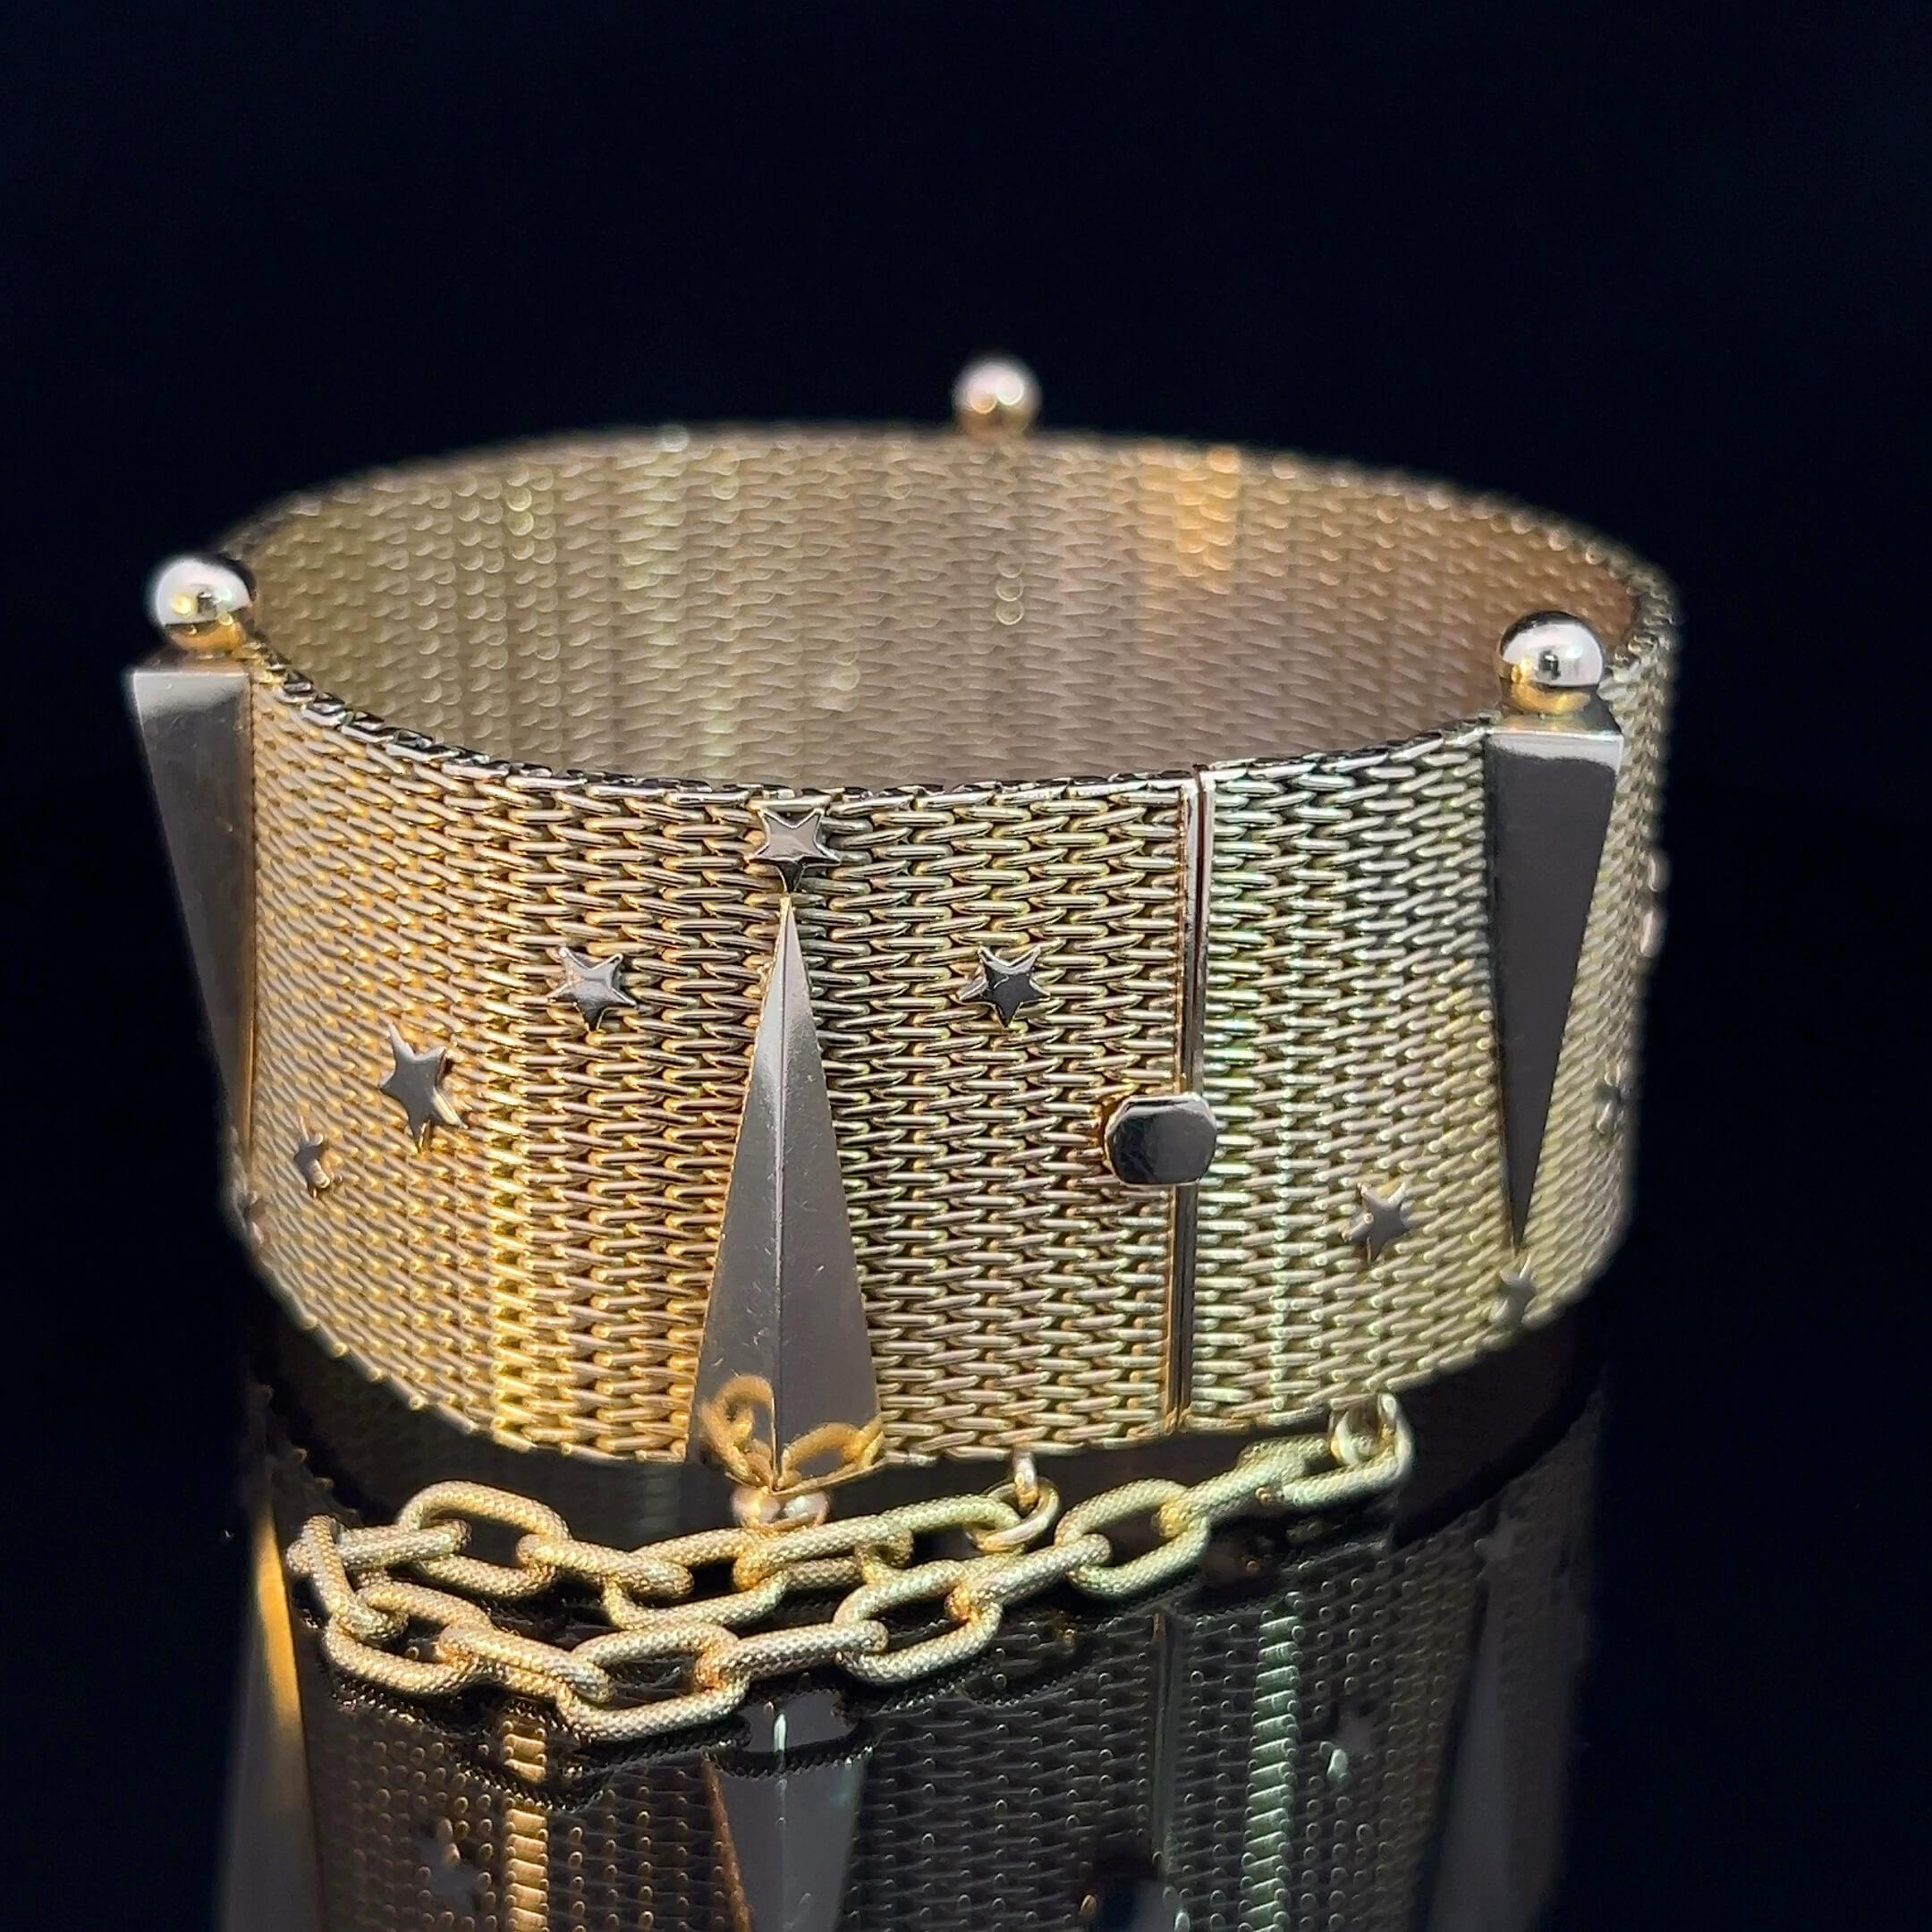 One superb 18k rose-gold European-made mesh bracelet adorned with ‘stars and raised comets’. Tongue catch and large embossed safety chain.

Metal: 18k yellow gold
Measurements: Length 18cm, width 2.7cm
Weight: 85.34 grams
Era: Retro Circa 1960s

The